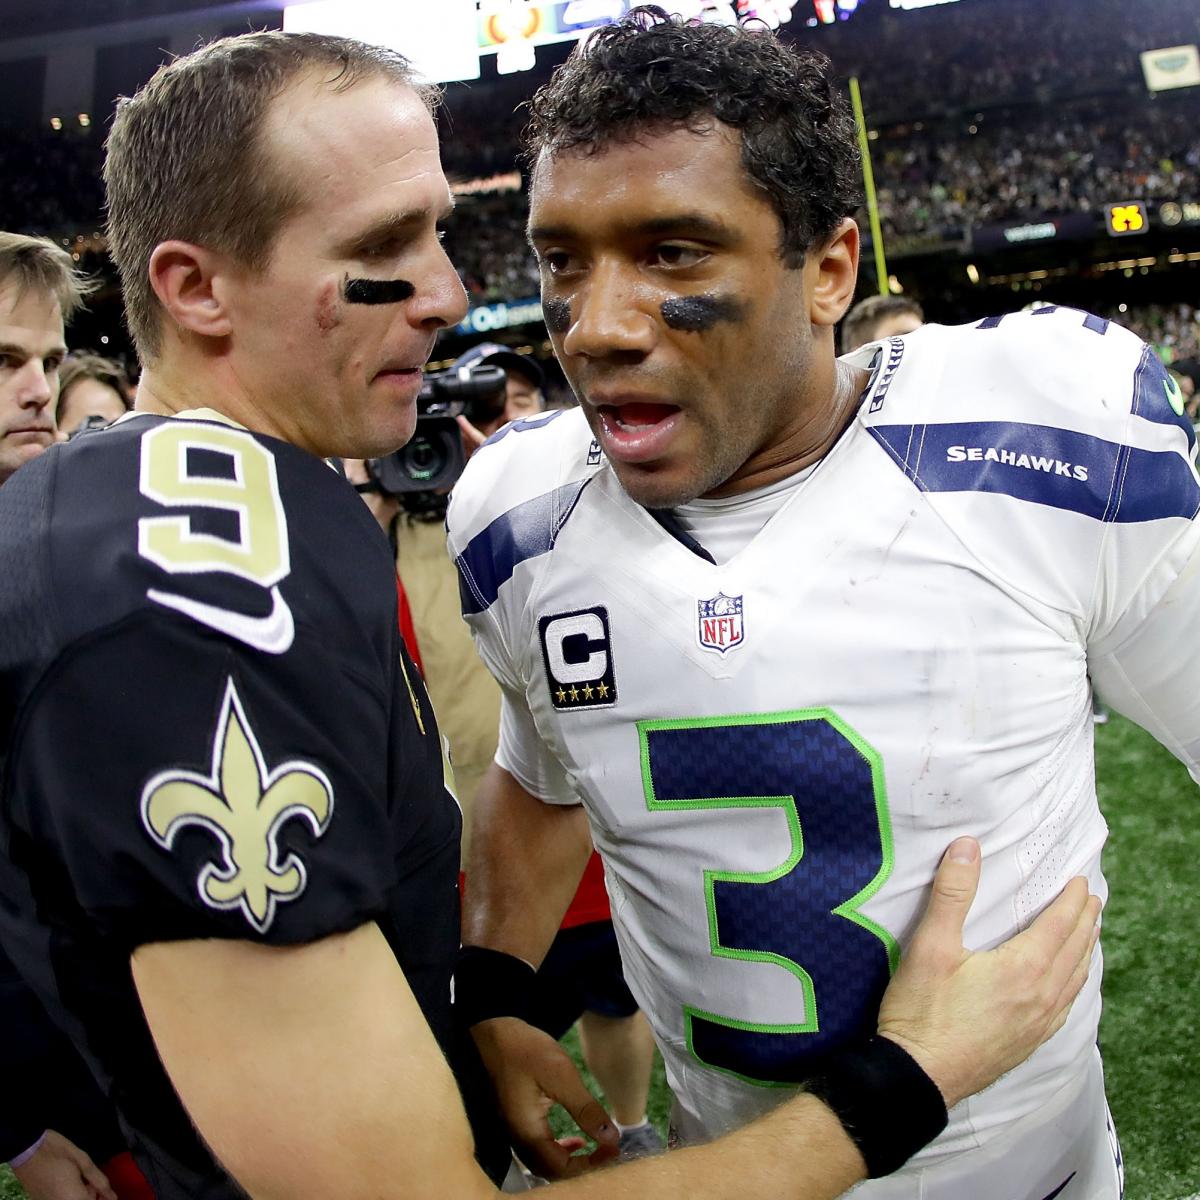 Russell Wilson Gives Drew Brees His Starting Spot in 2020 NFL Pro Bowl | Bleacher ...